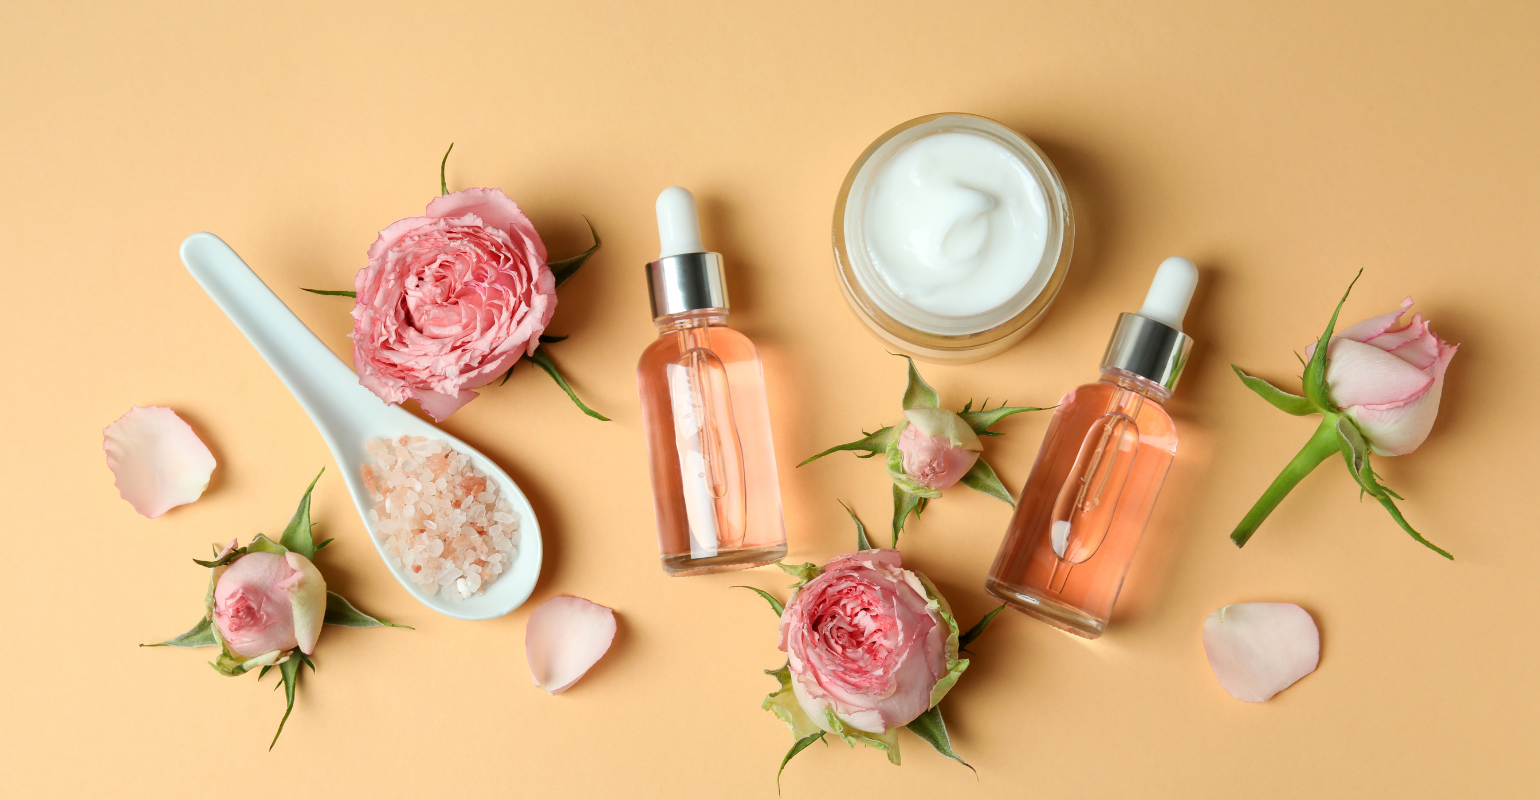 What Does Natural Beauty Mean In The Skincare Industry? - The Good Trade